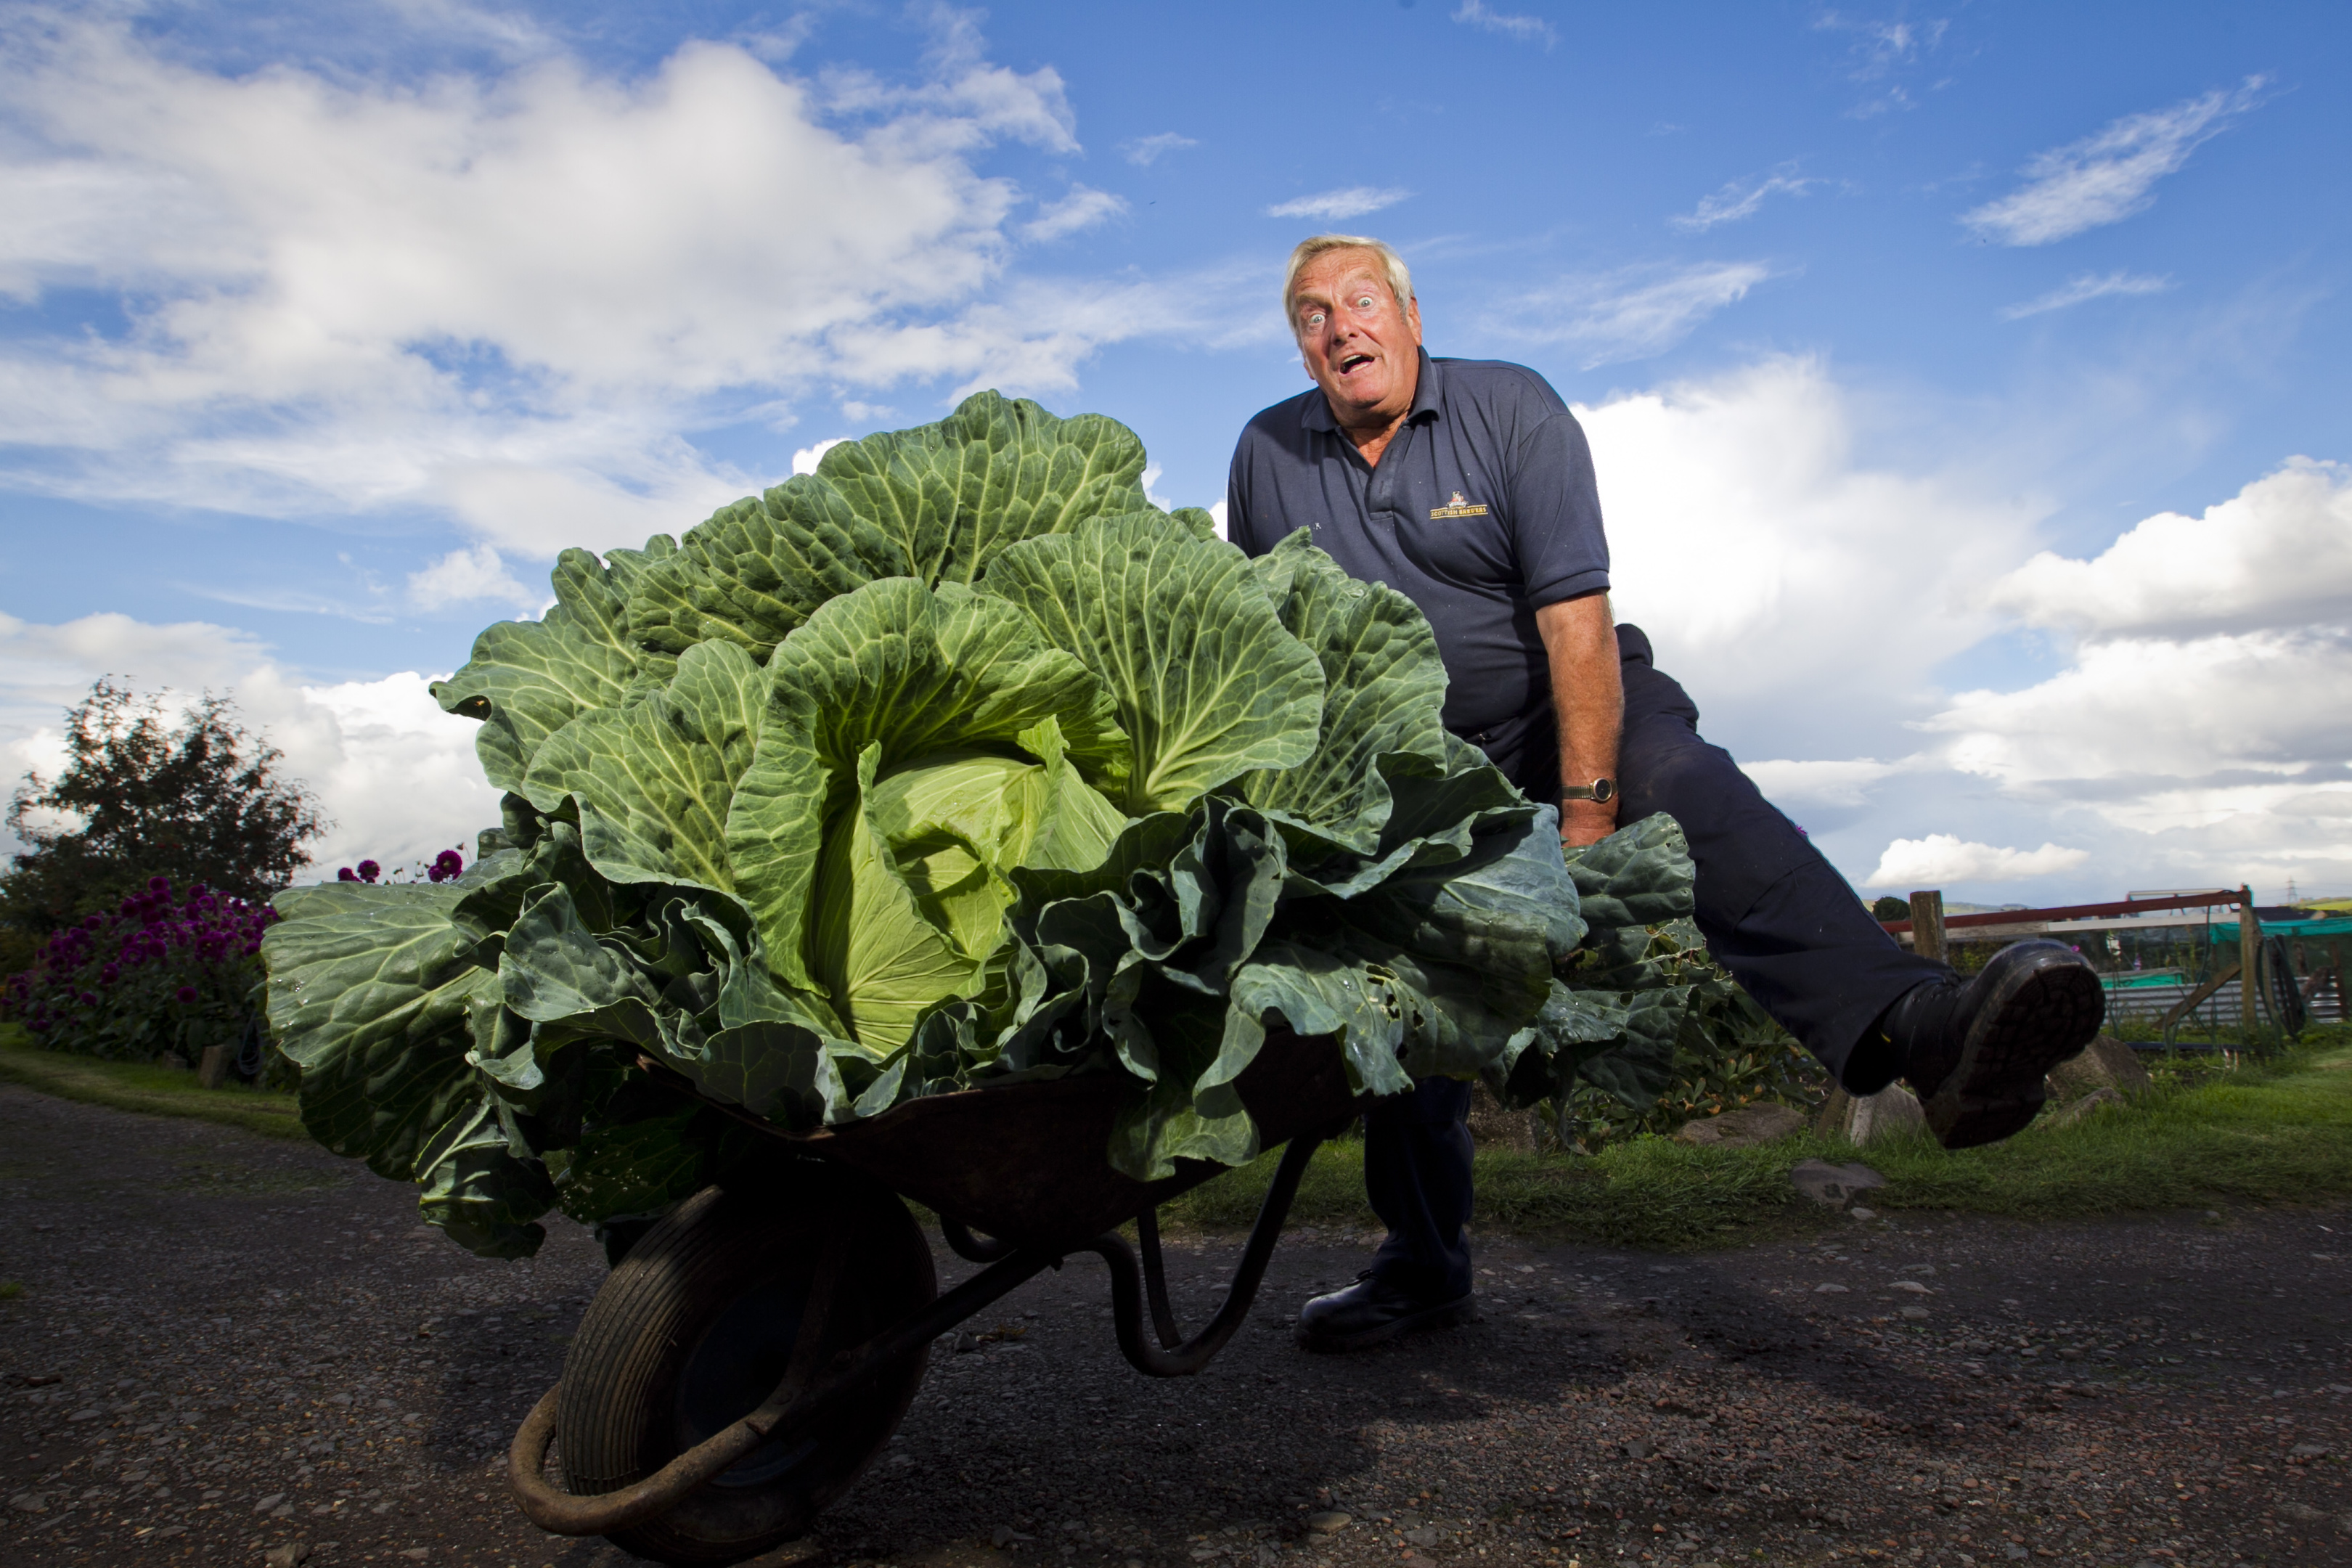 Bryan Calder with his giant cabbage (Andrew Cawley / DC Thomson)